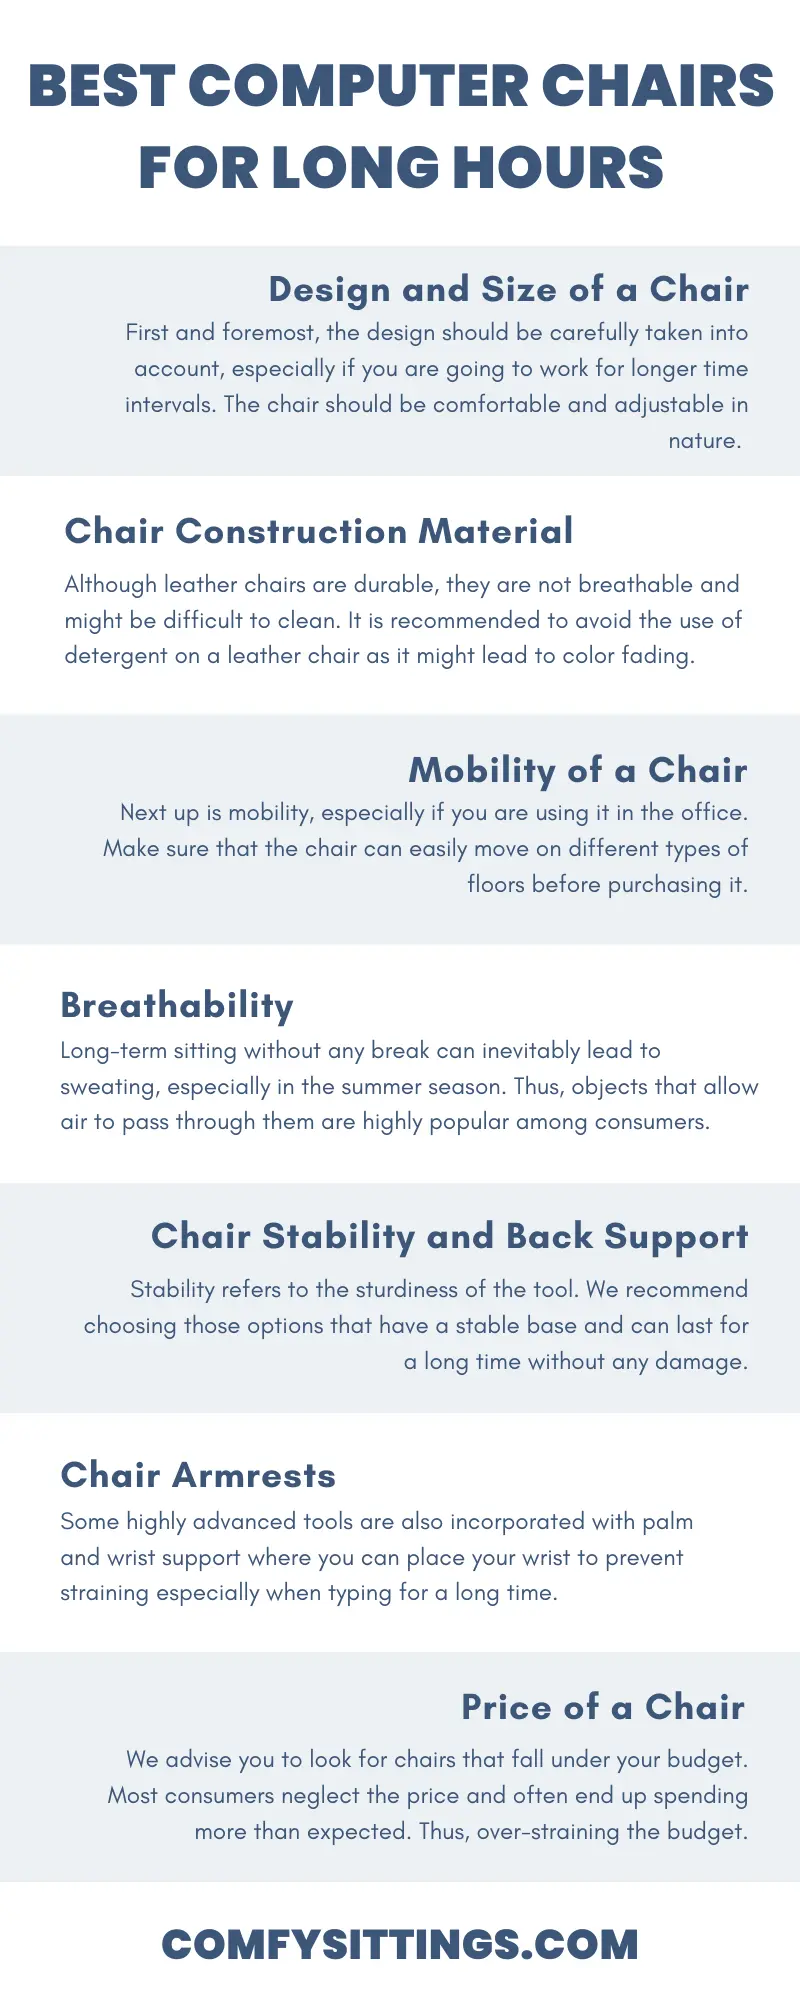 Factors to Consider While Purchasing the Ergonomic Chairs for Long Hours